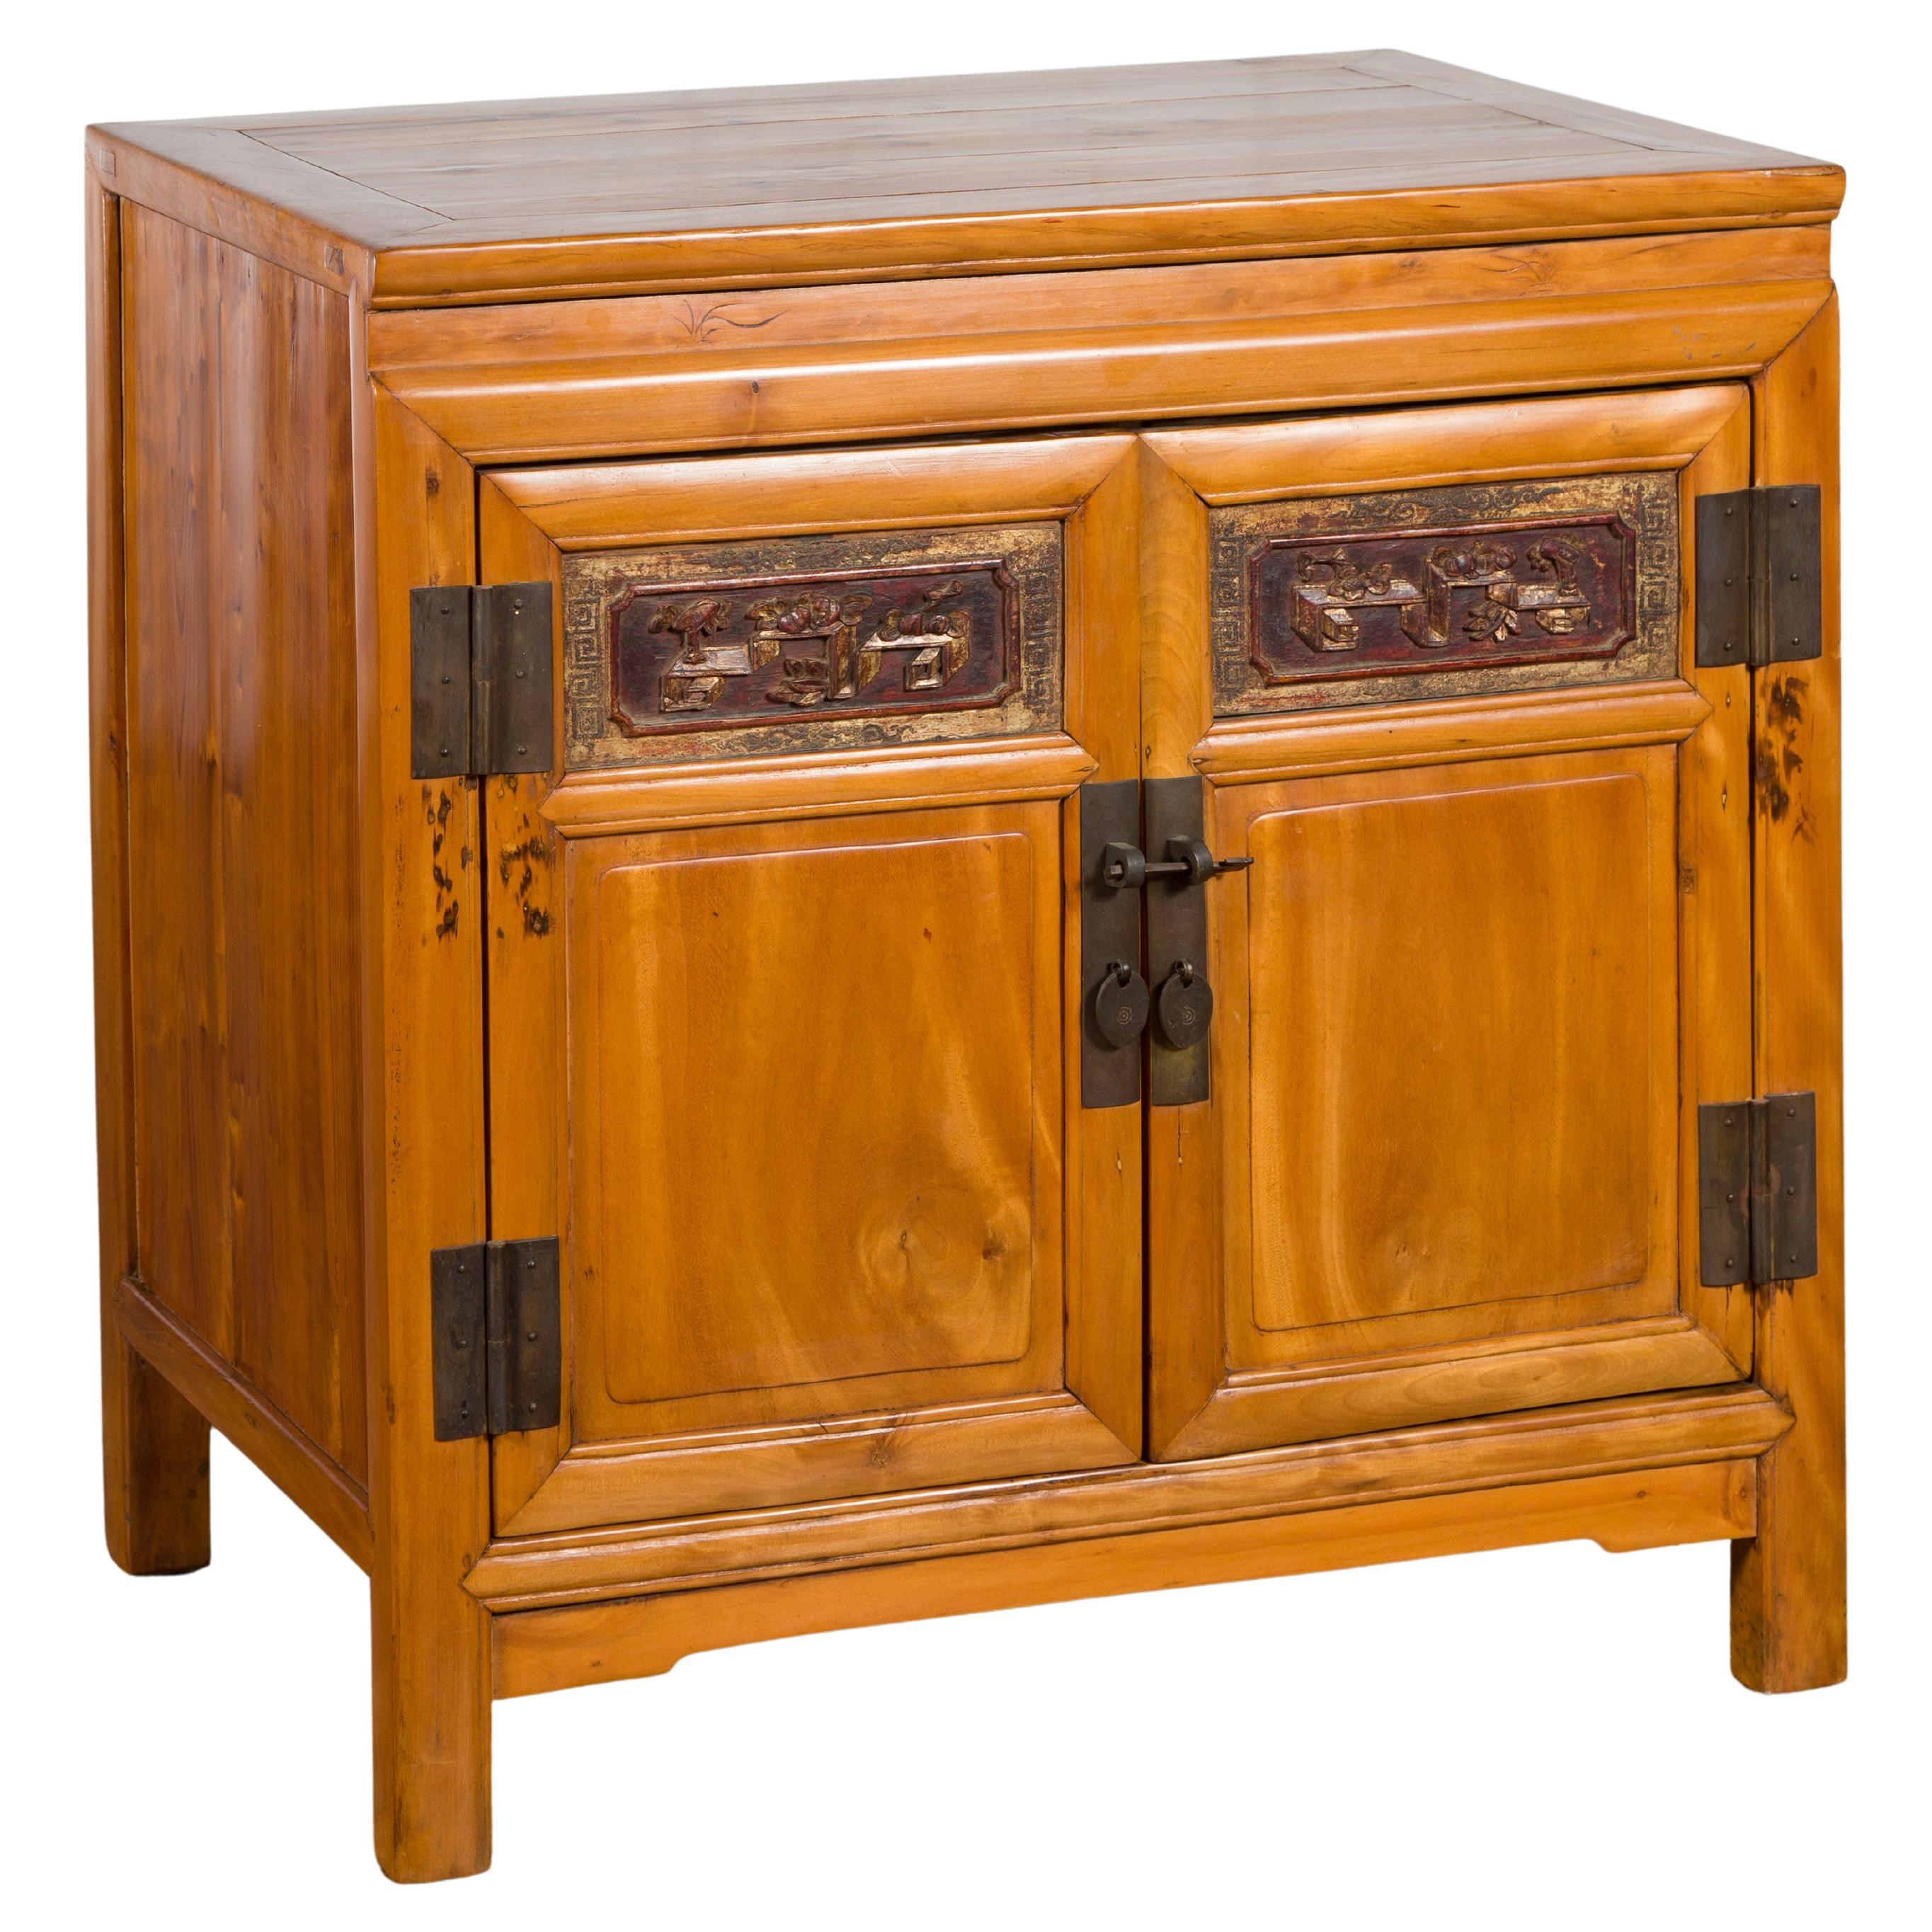 Chinese Antique Elmwood Side Cabinet with Carved Panels and Hidden Drawers